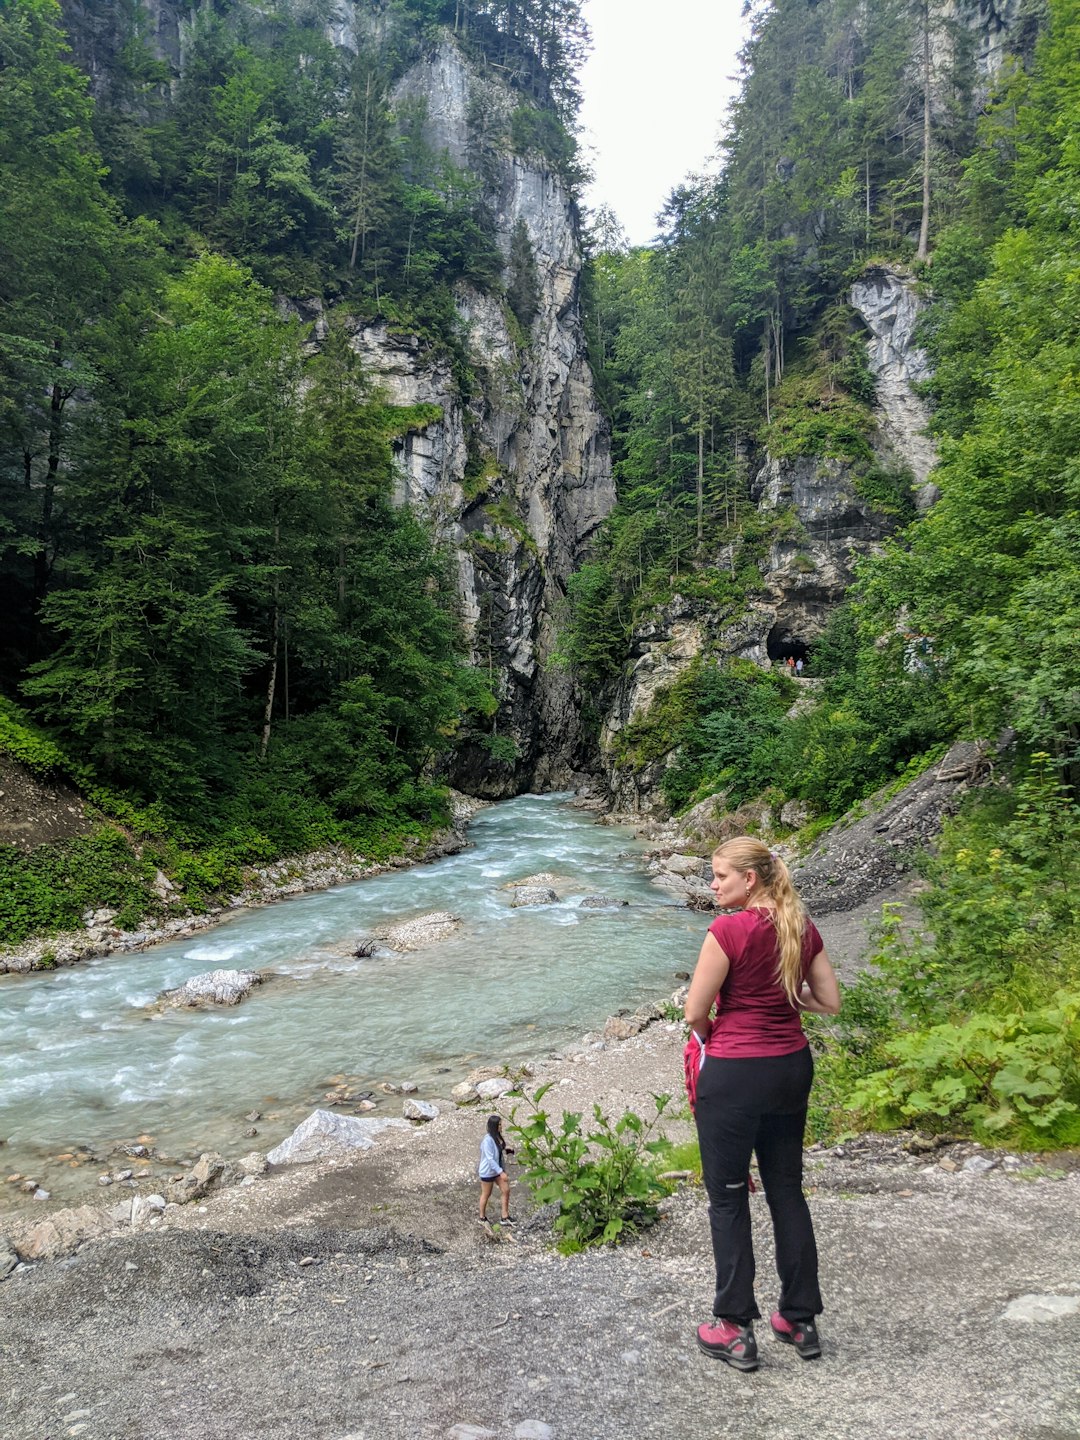 Travel Tips and Stories of Partnachklamm in Germany